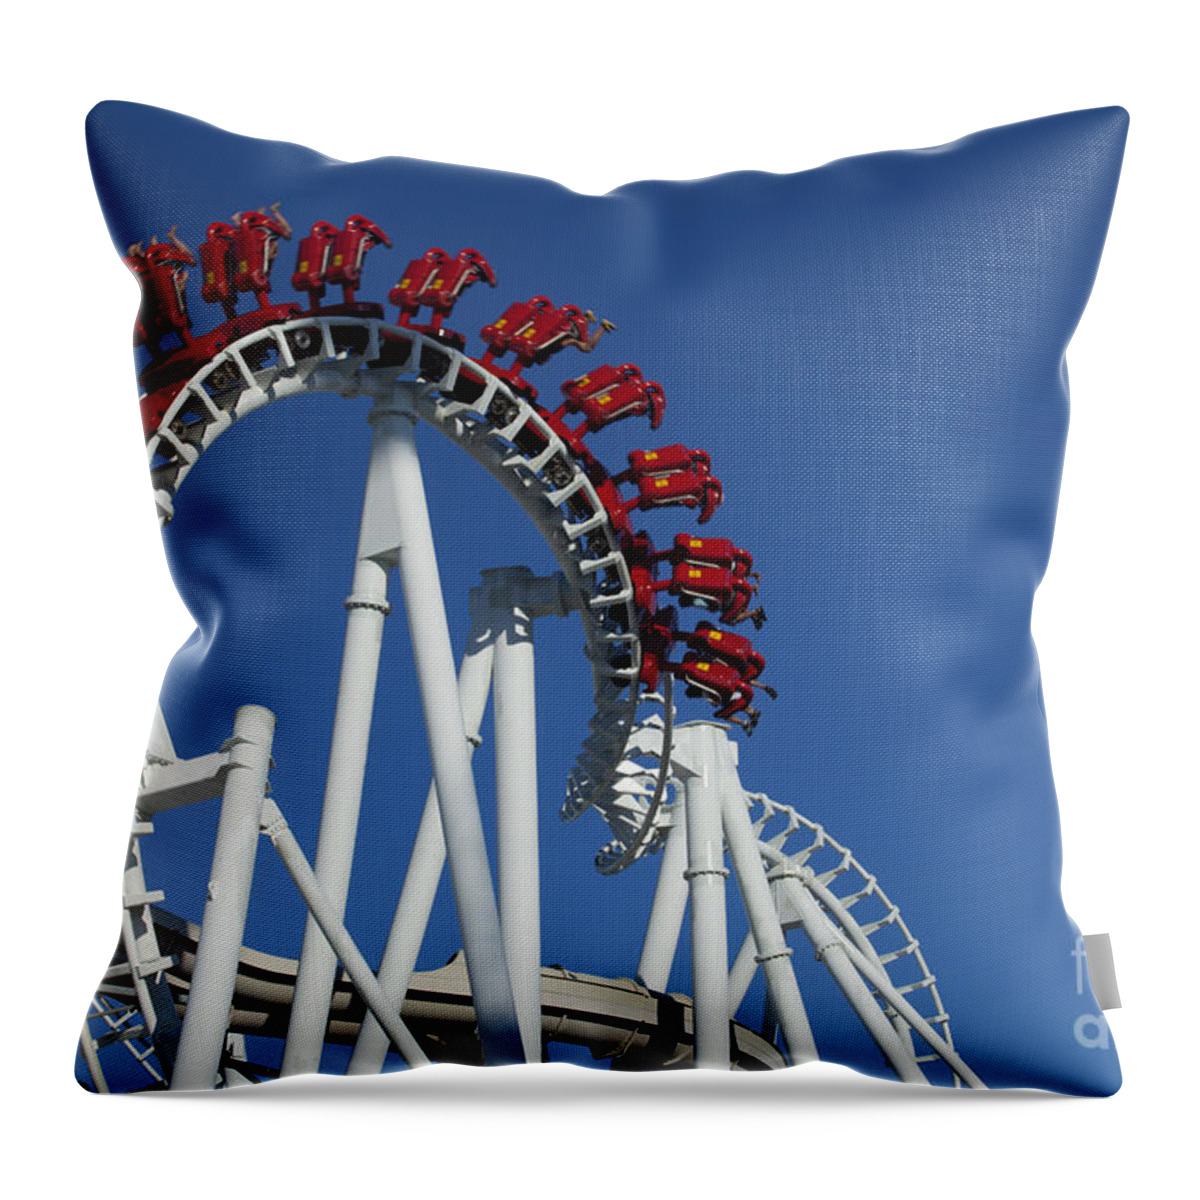 Wildwood Throw Pillow featuring the photograph Modern Rollercoaster #4 by Anthony Totah